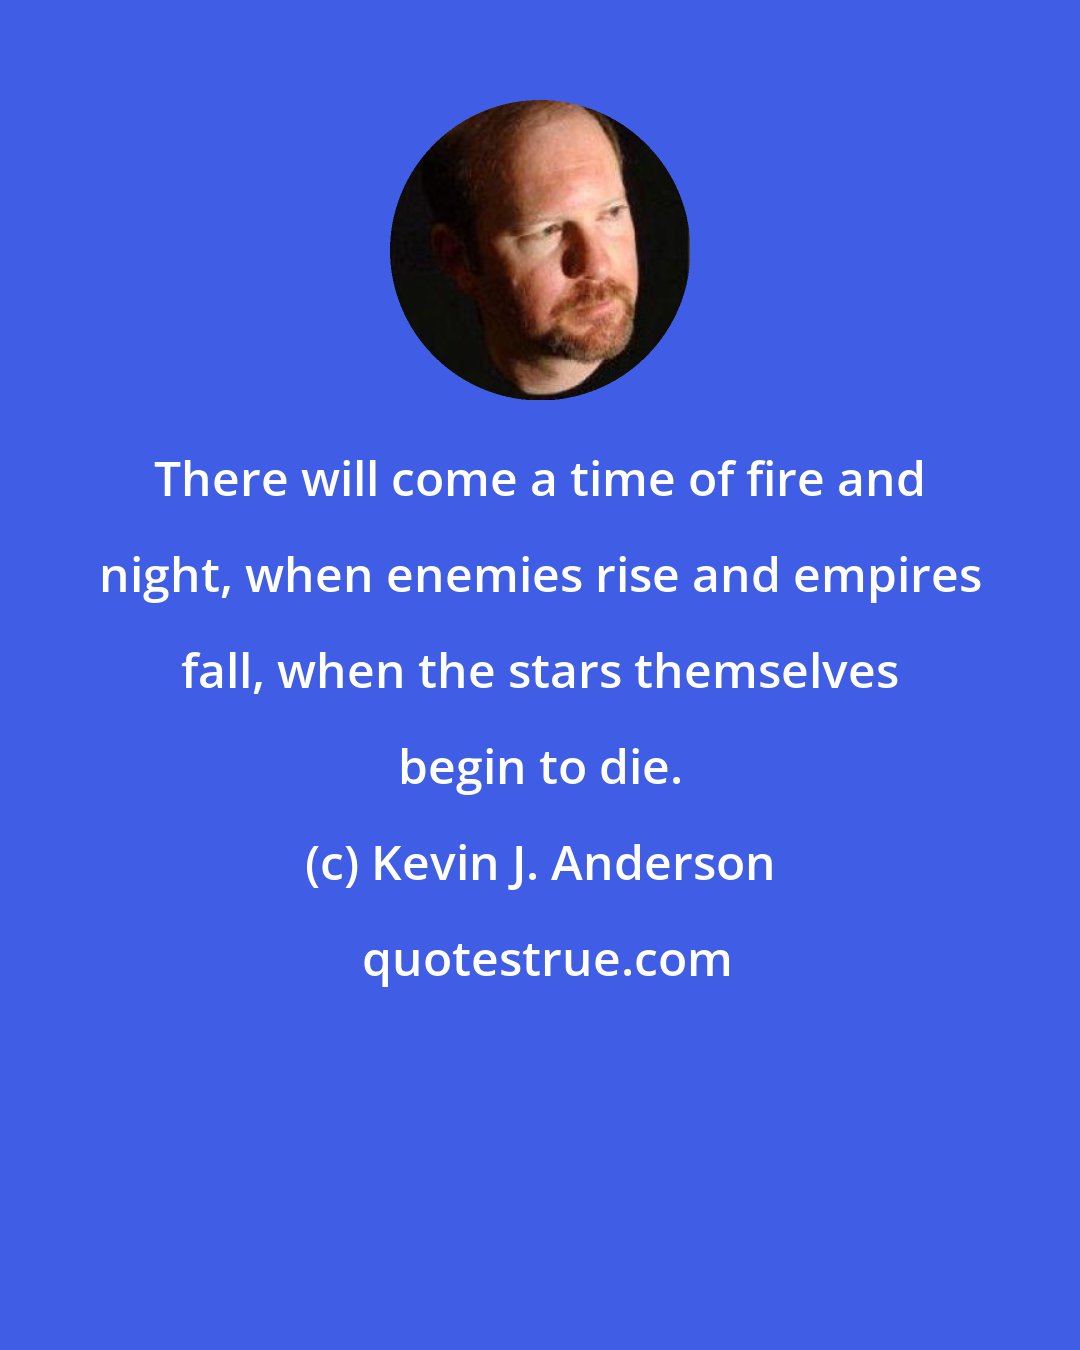 Kevin J. Anderson: There will come a time of fire and night, when enemies rise and empires fall, when the stars themselves begin to die.